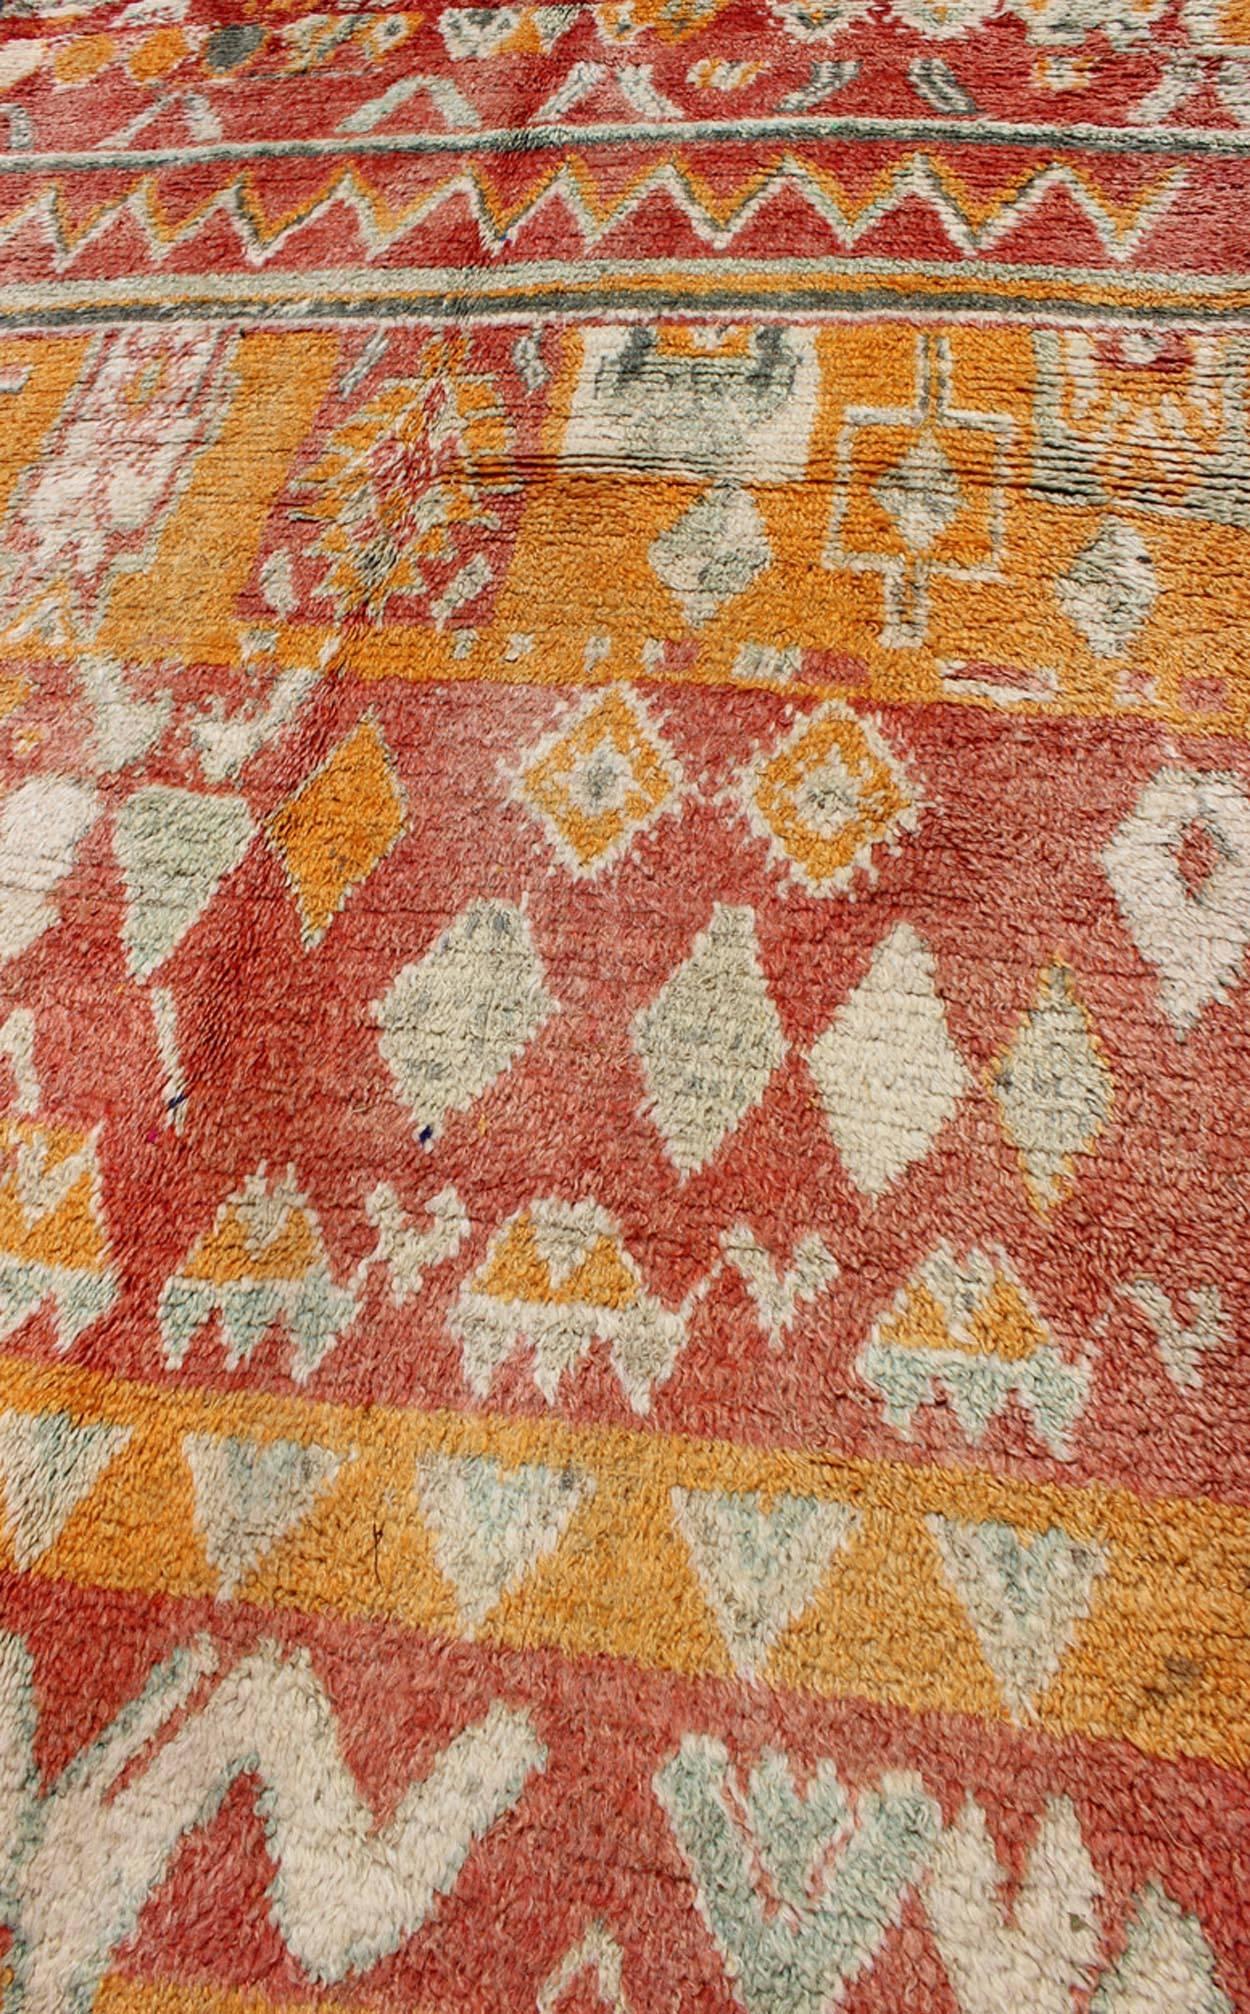 Tribal Design Vintage Moroccan Rug in Orange, Red, Mint Green and Ivory For Sale 3